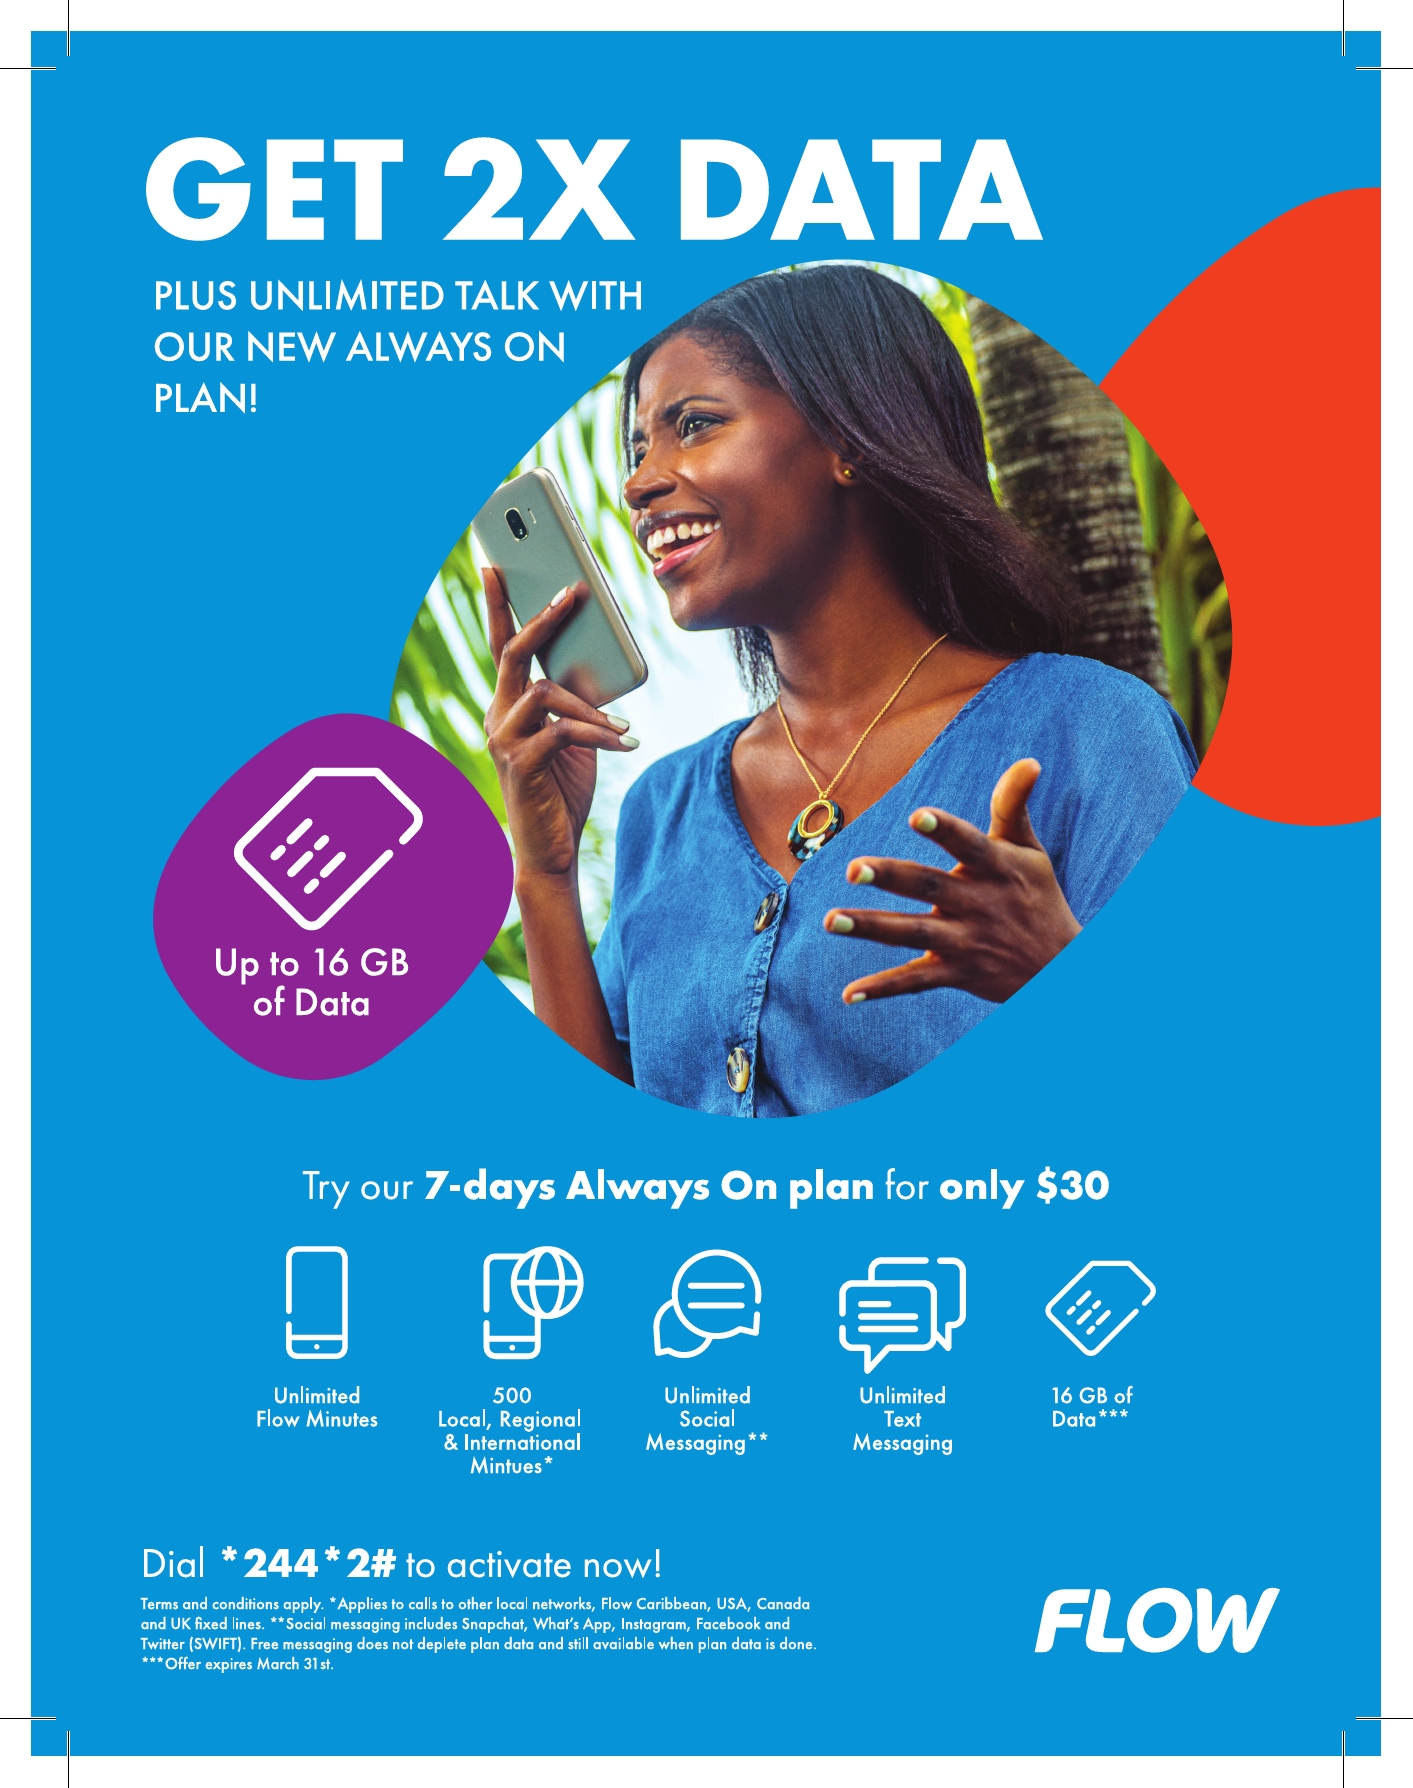 Big Talk. Big Data. Big Savings! Flow offers more value with new and improved prepaid combo plans